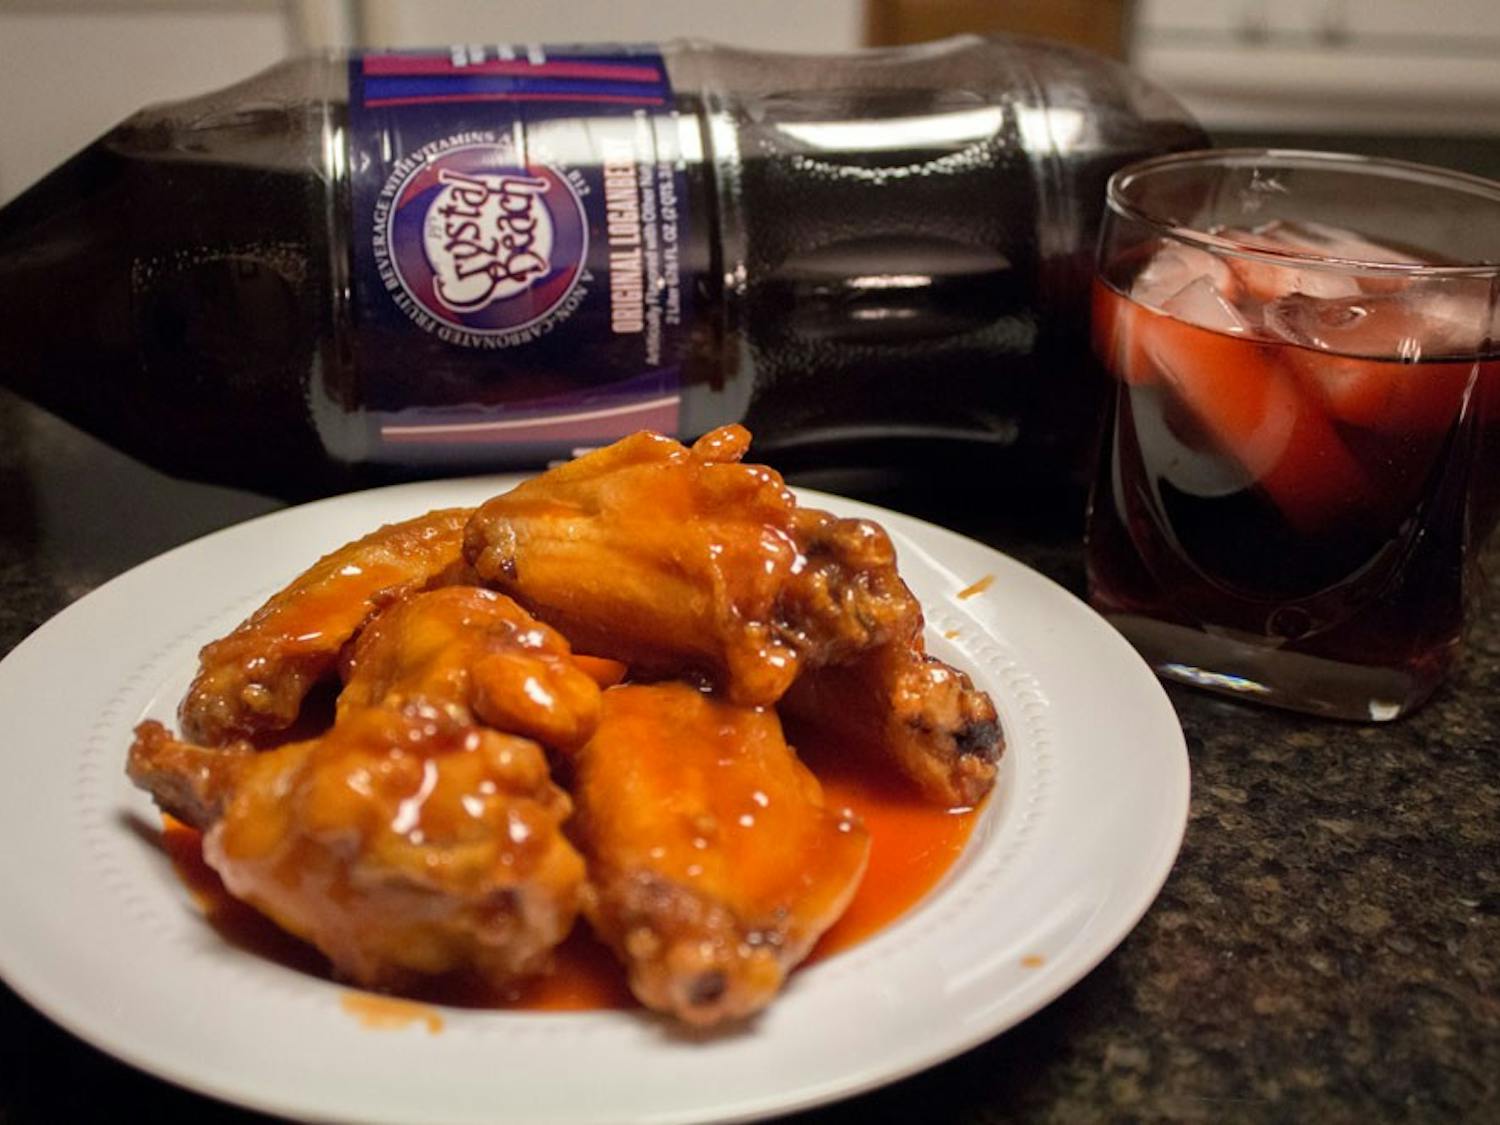 Chicken wings and Loganberry are some delectable treats that can only be found in Buffalo.